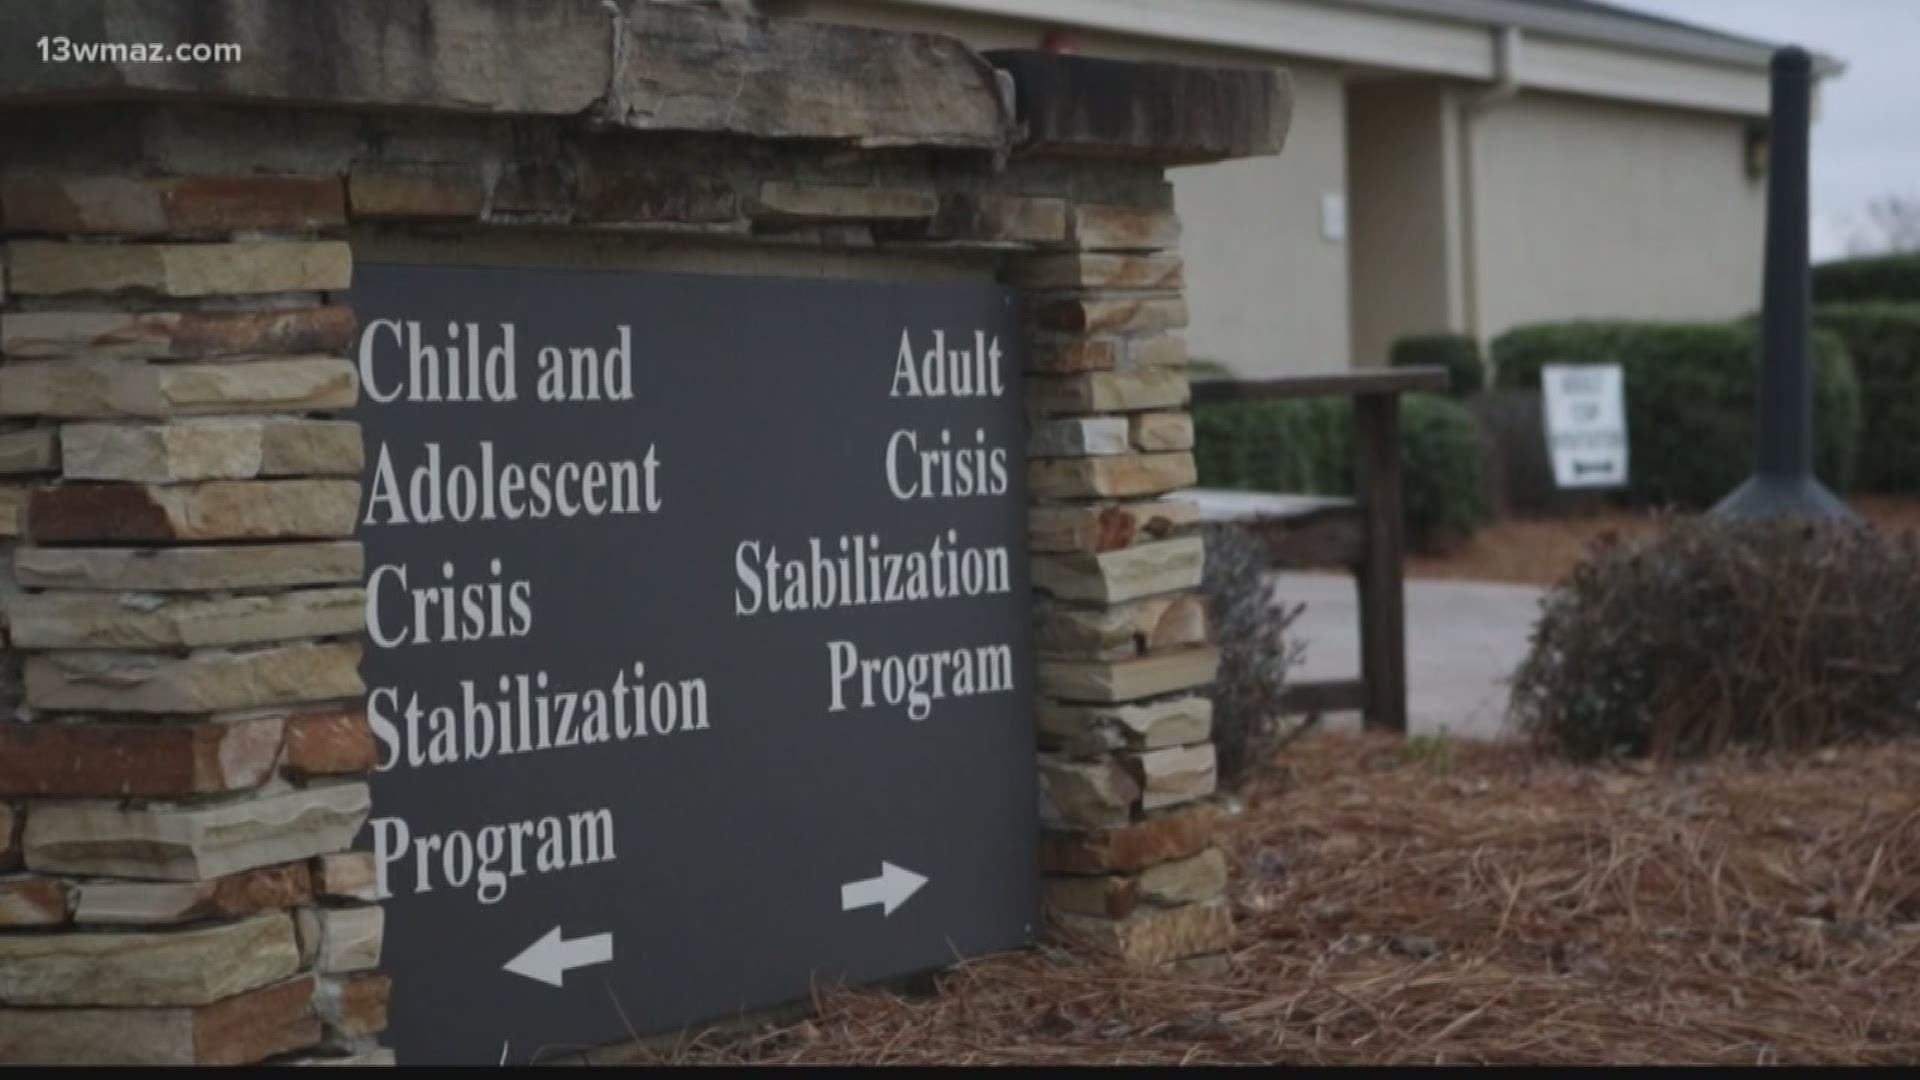 River Edge Behavioral Health is planning a new $13 million recovery center. It's designed to treat people who need extra care people suffering from mental illness, developmental disabilities, and addiction.